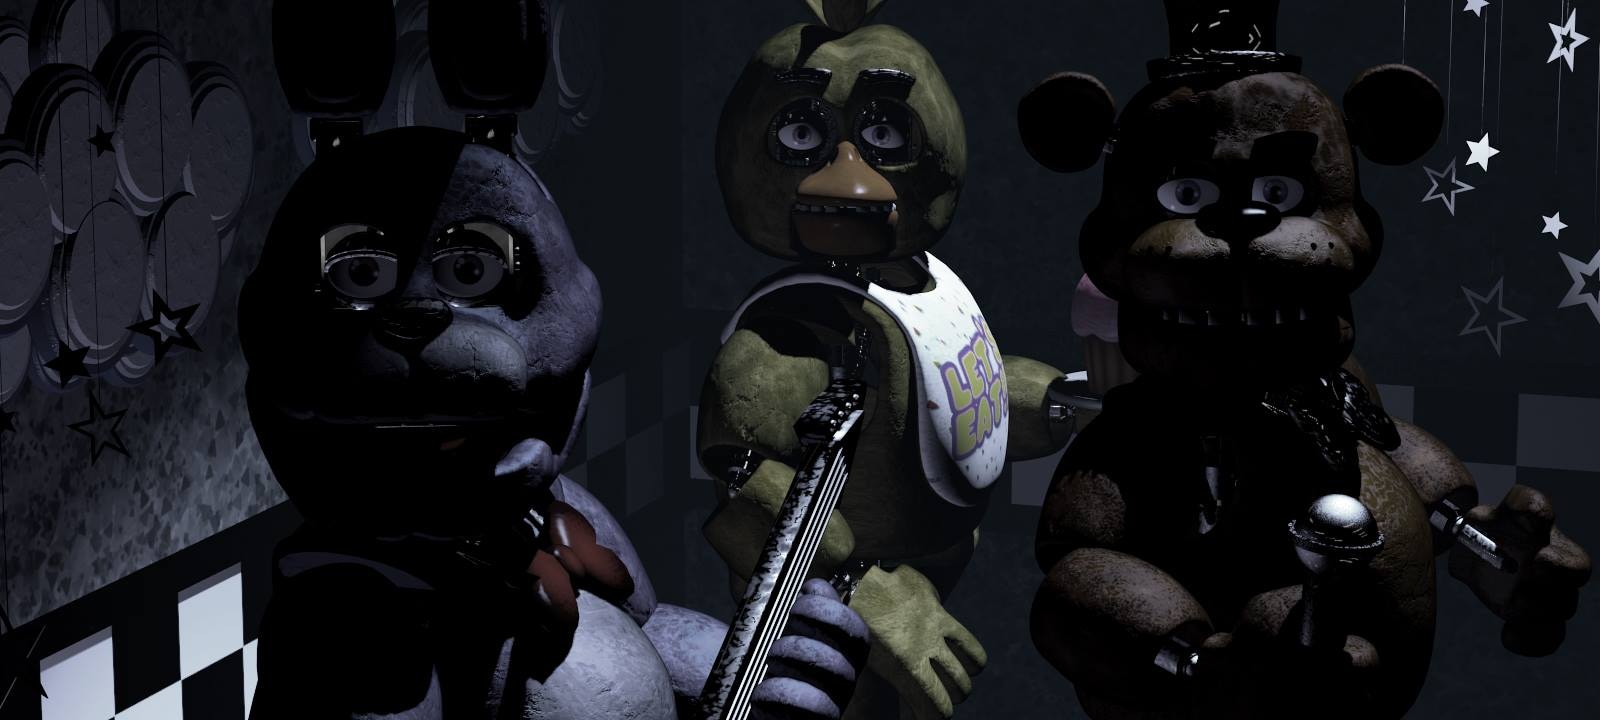 Making Nightmare Animatronics of every FNAF character (except the classic  animatronics as they are being replaced with the FNAF plus animatronics).  Give me some ideas for speed edits if you'd like to! 